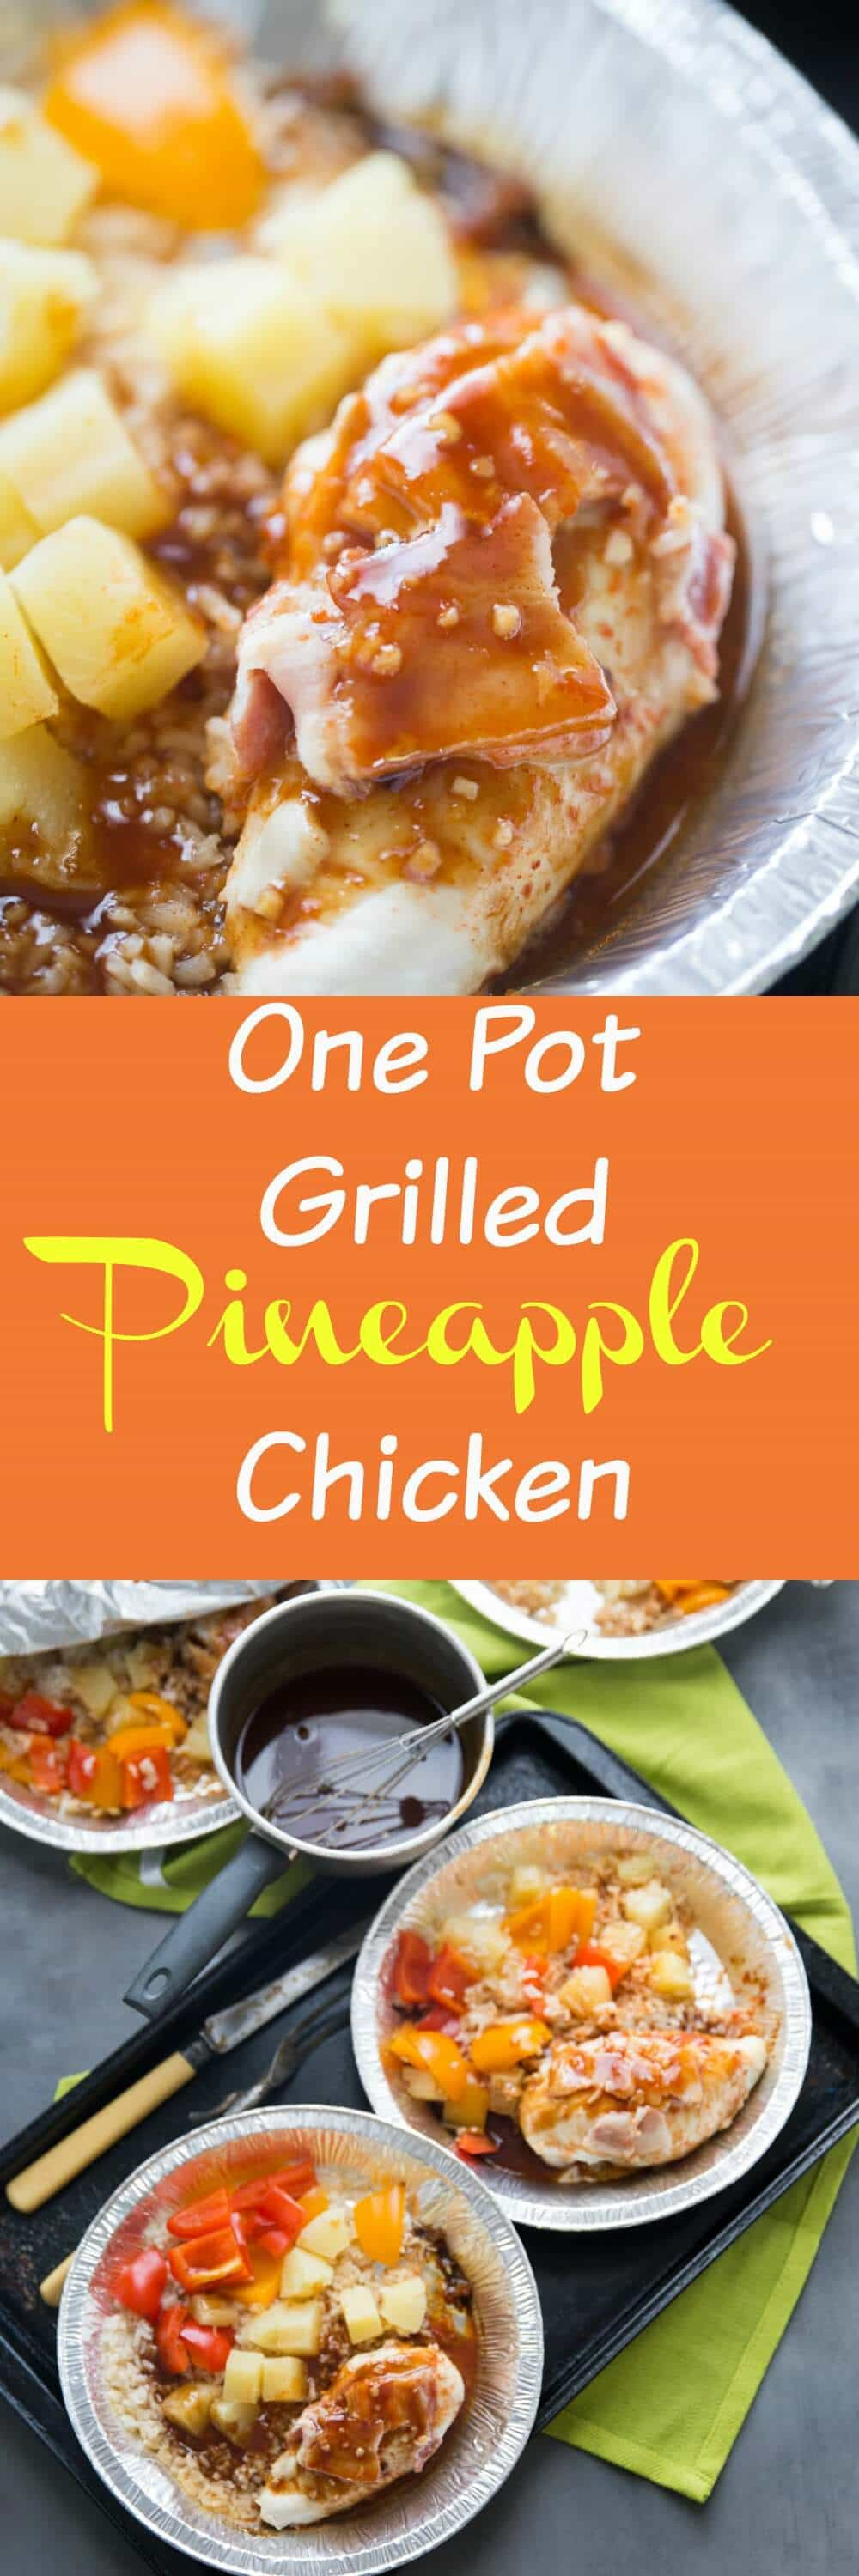 Pineapple Chicken Recipes
 easy pineapple chicken